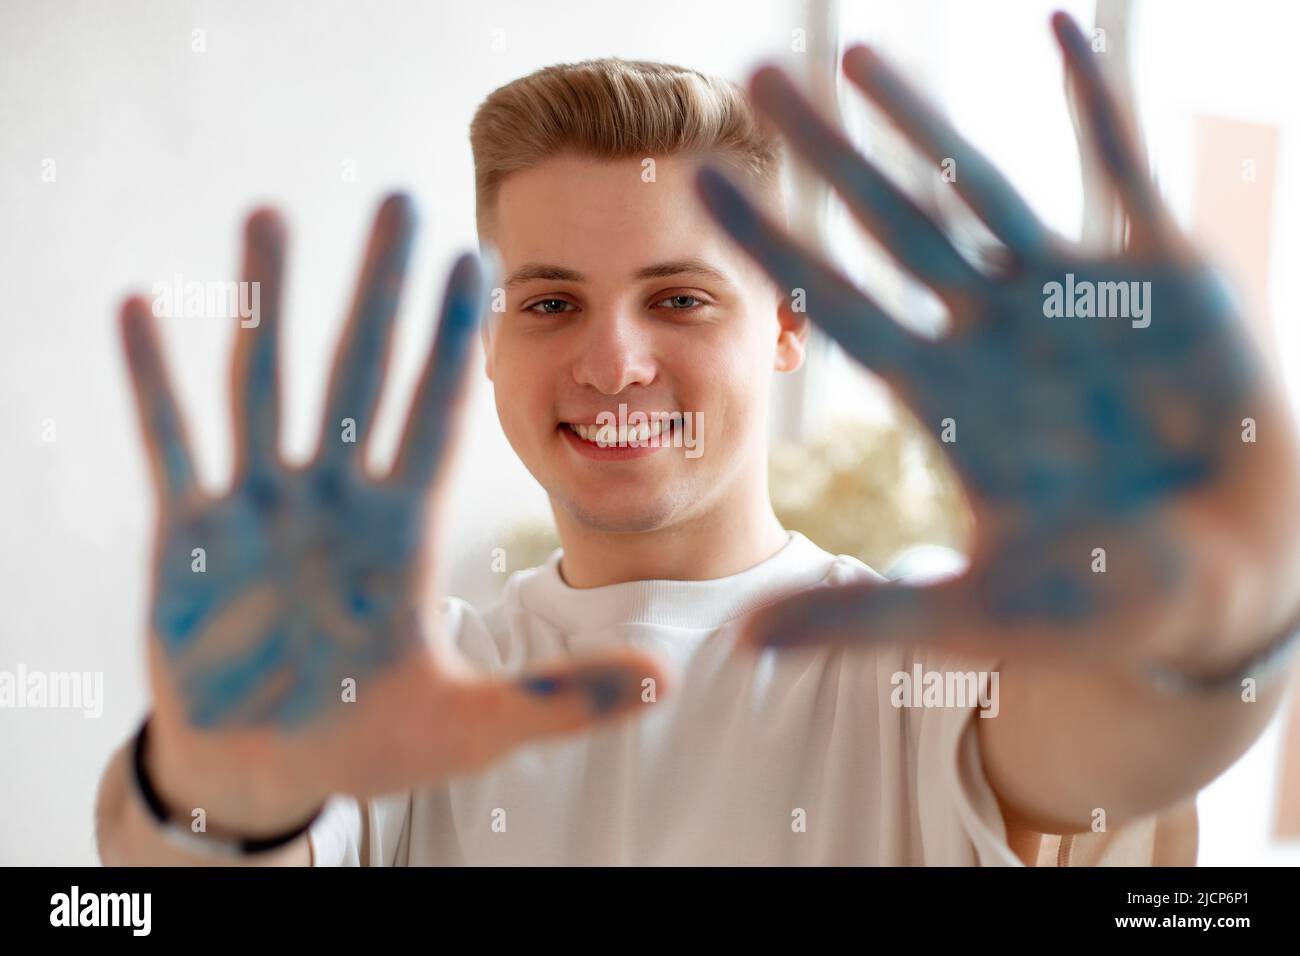 Beautiful blonde toothy smile young man drawing. Male looking at camera and show defocused blue painted palms. Stock Photo